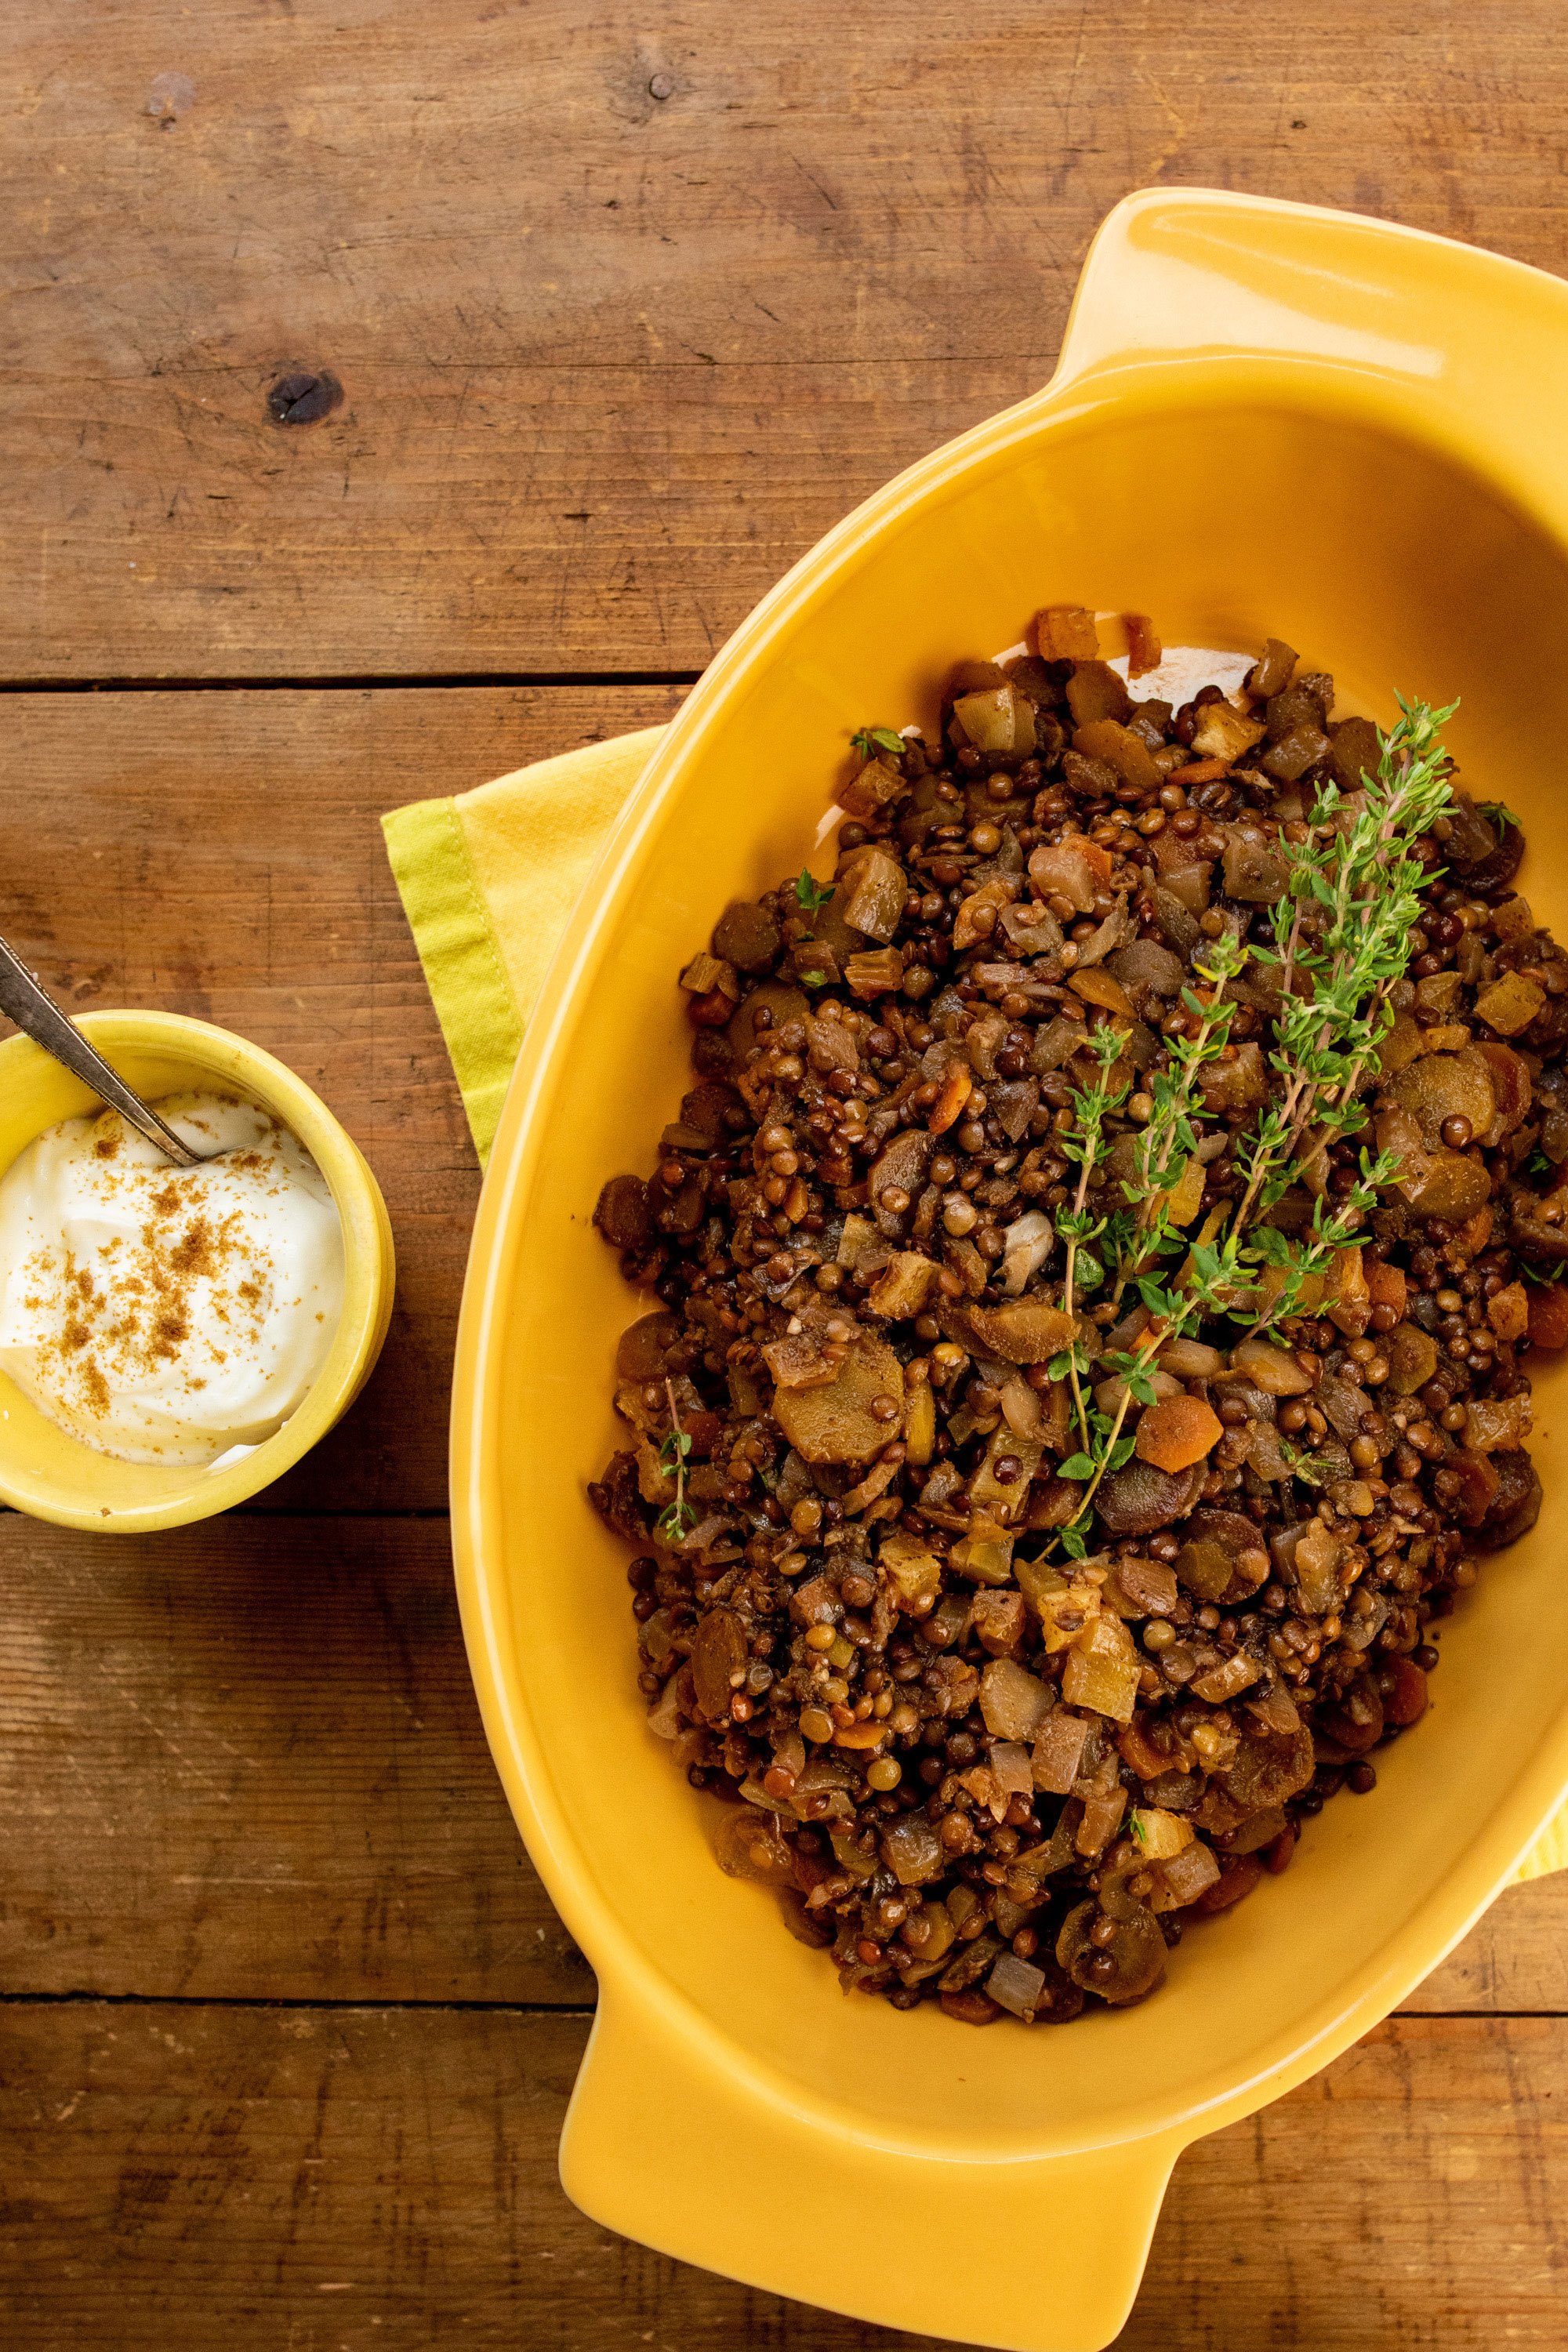 Lentils and Carrots with Dried Apricots in a yellow serving dish o a wooden surface with a little bowl of yogurt.